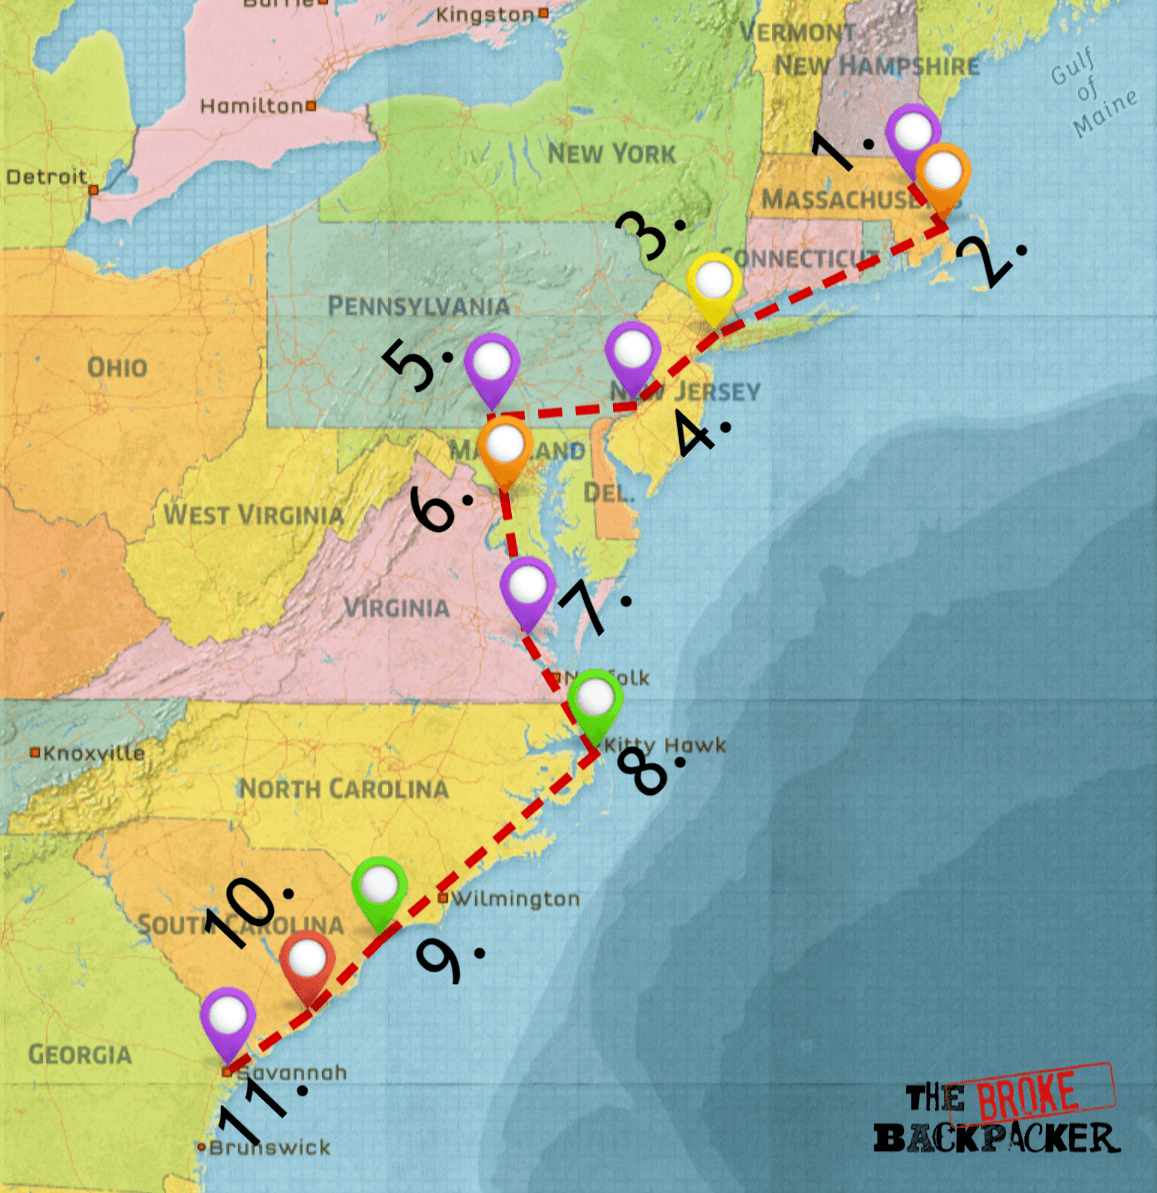 east coast road trip map - driving itinerary #2